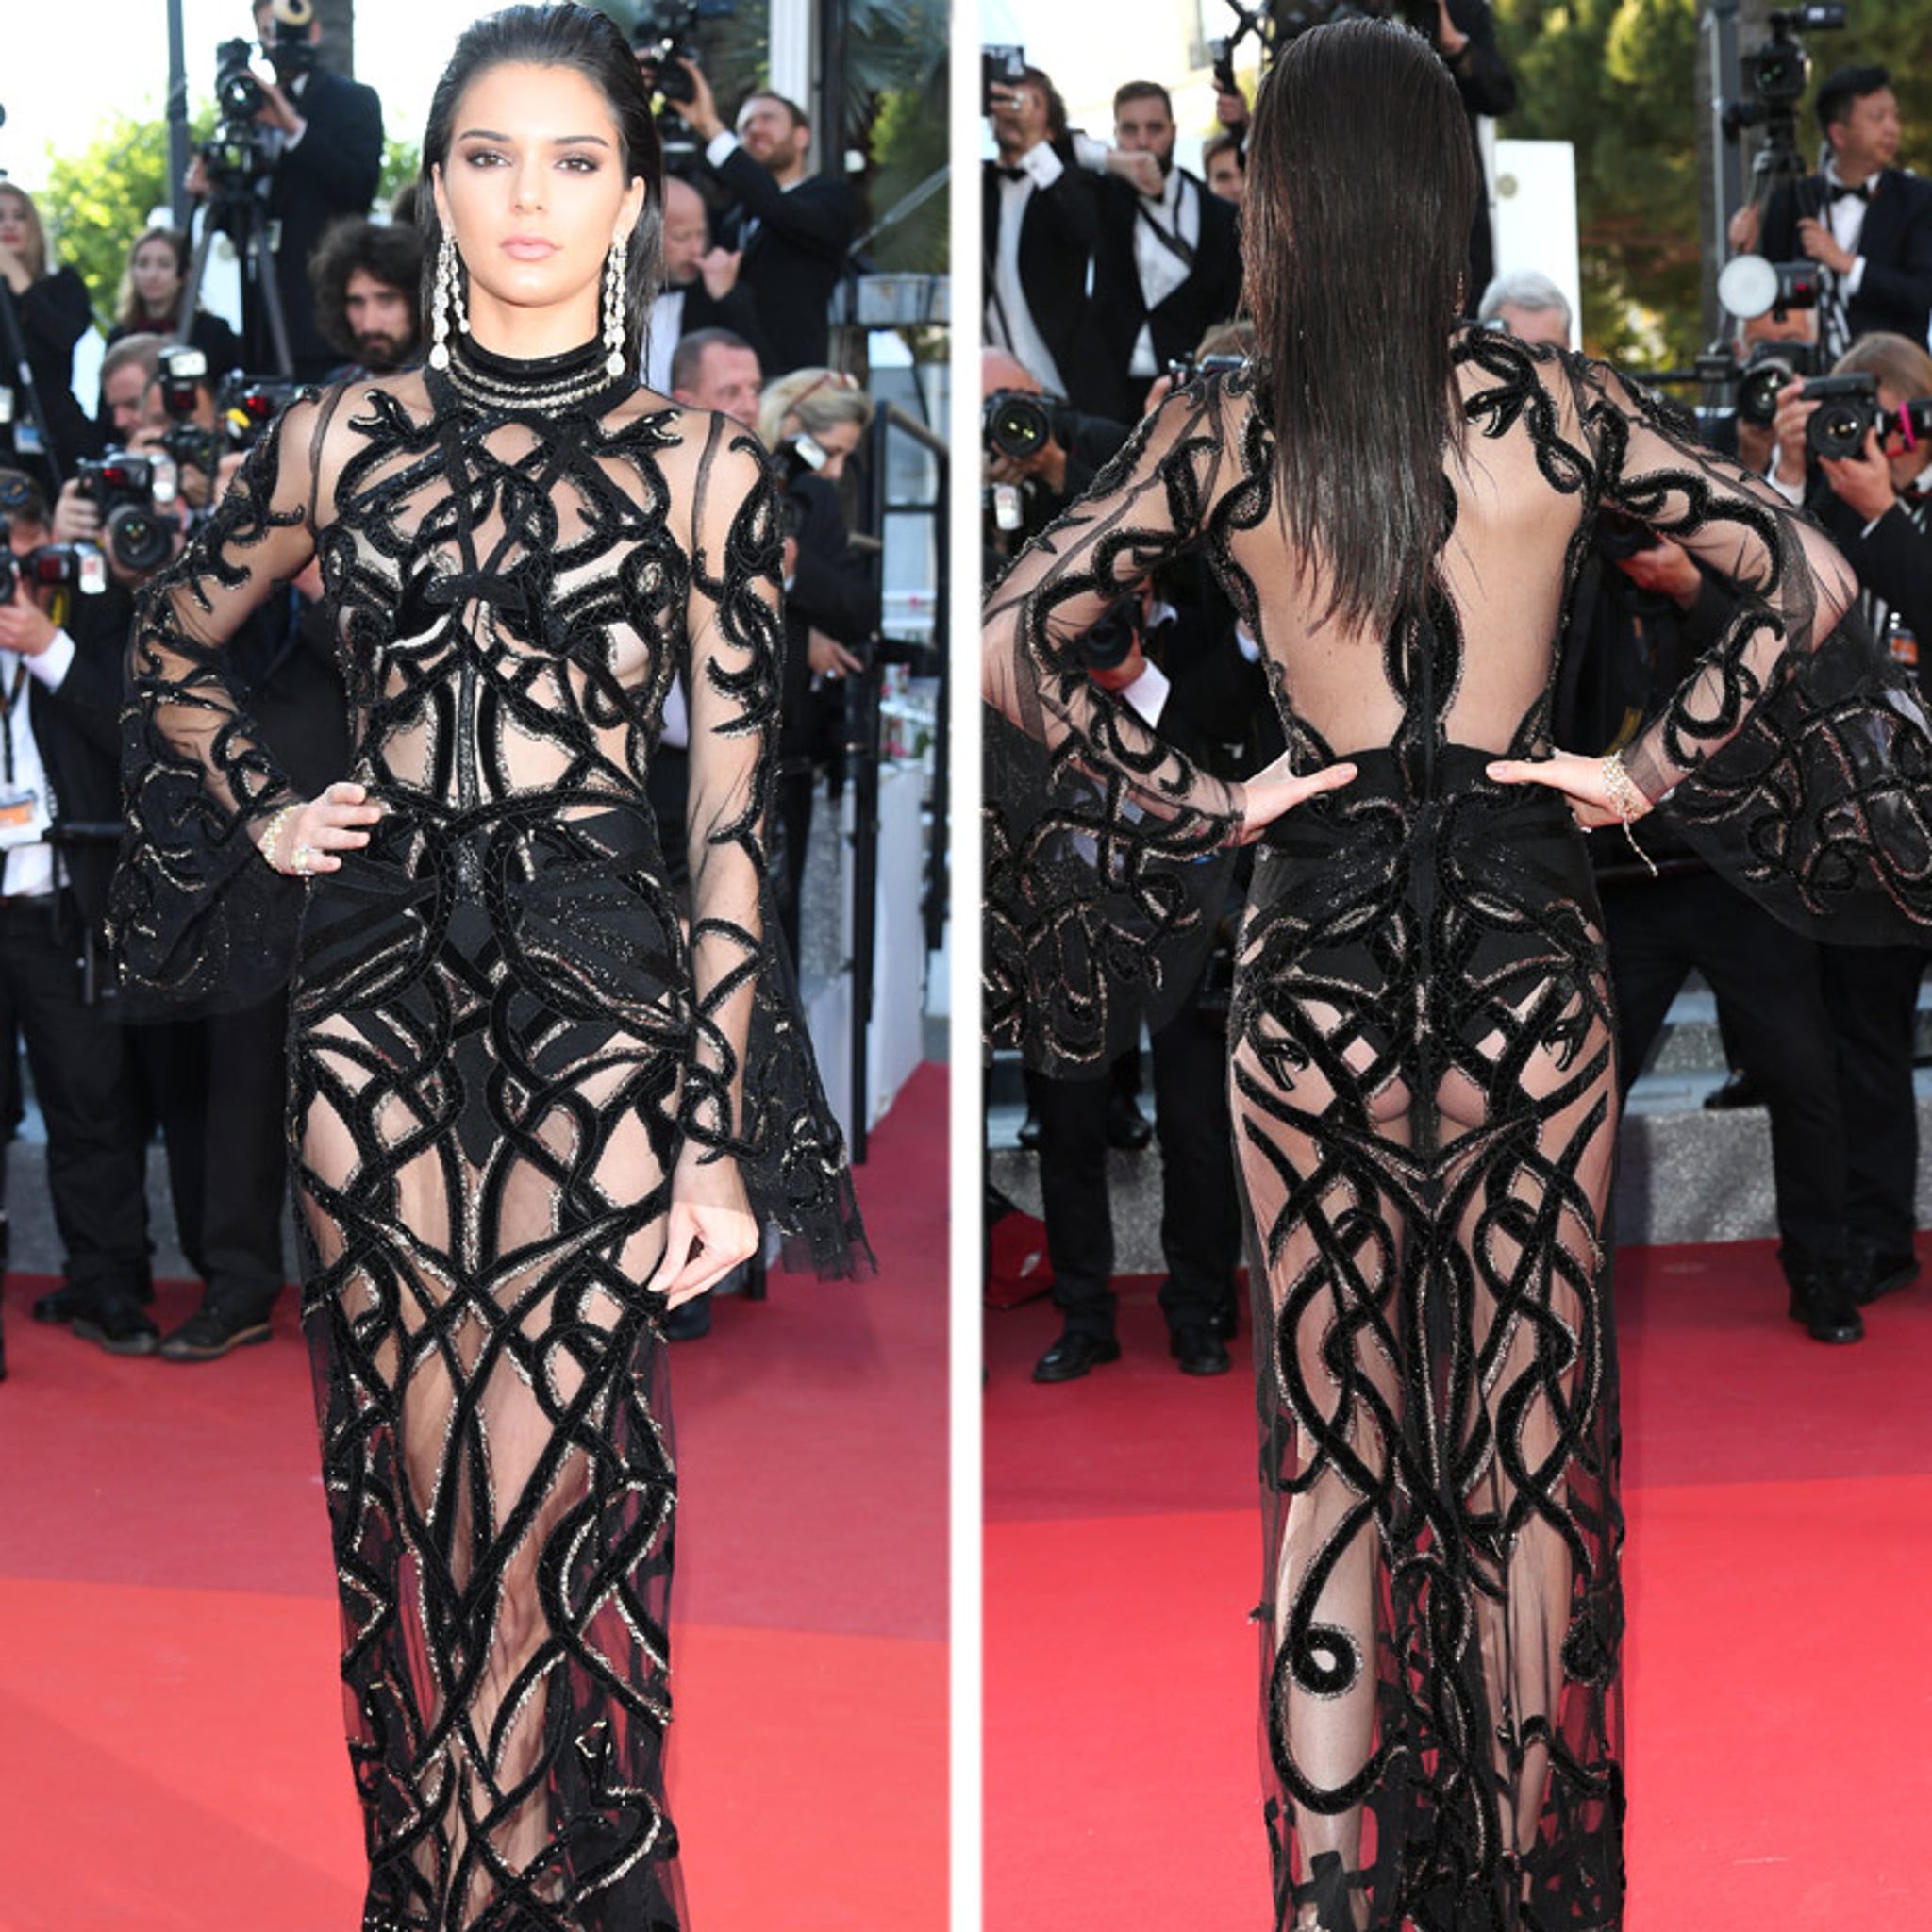 Kendall Jenner Wearing Versace at Cannes